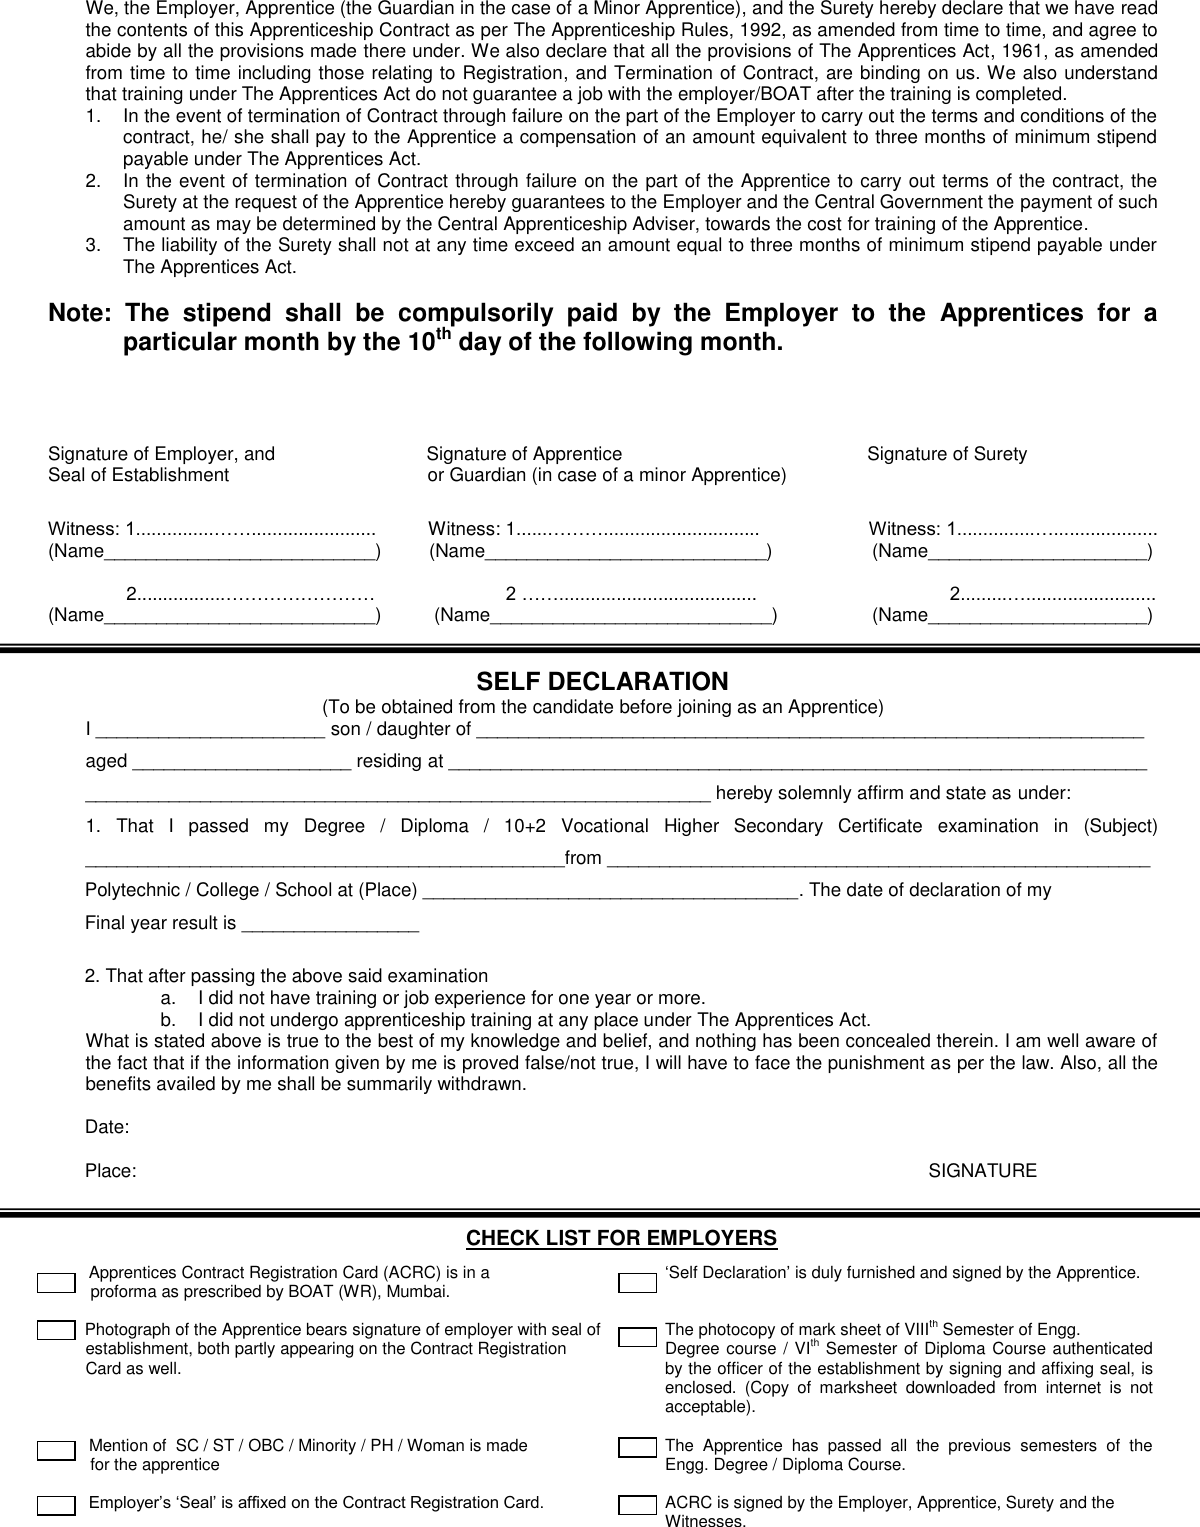 Page 2 of 2 - APPRENTICES CONTRACT REGISTRATION CARD MANUAL SUBMISSION Apprentice Blank Form